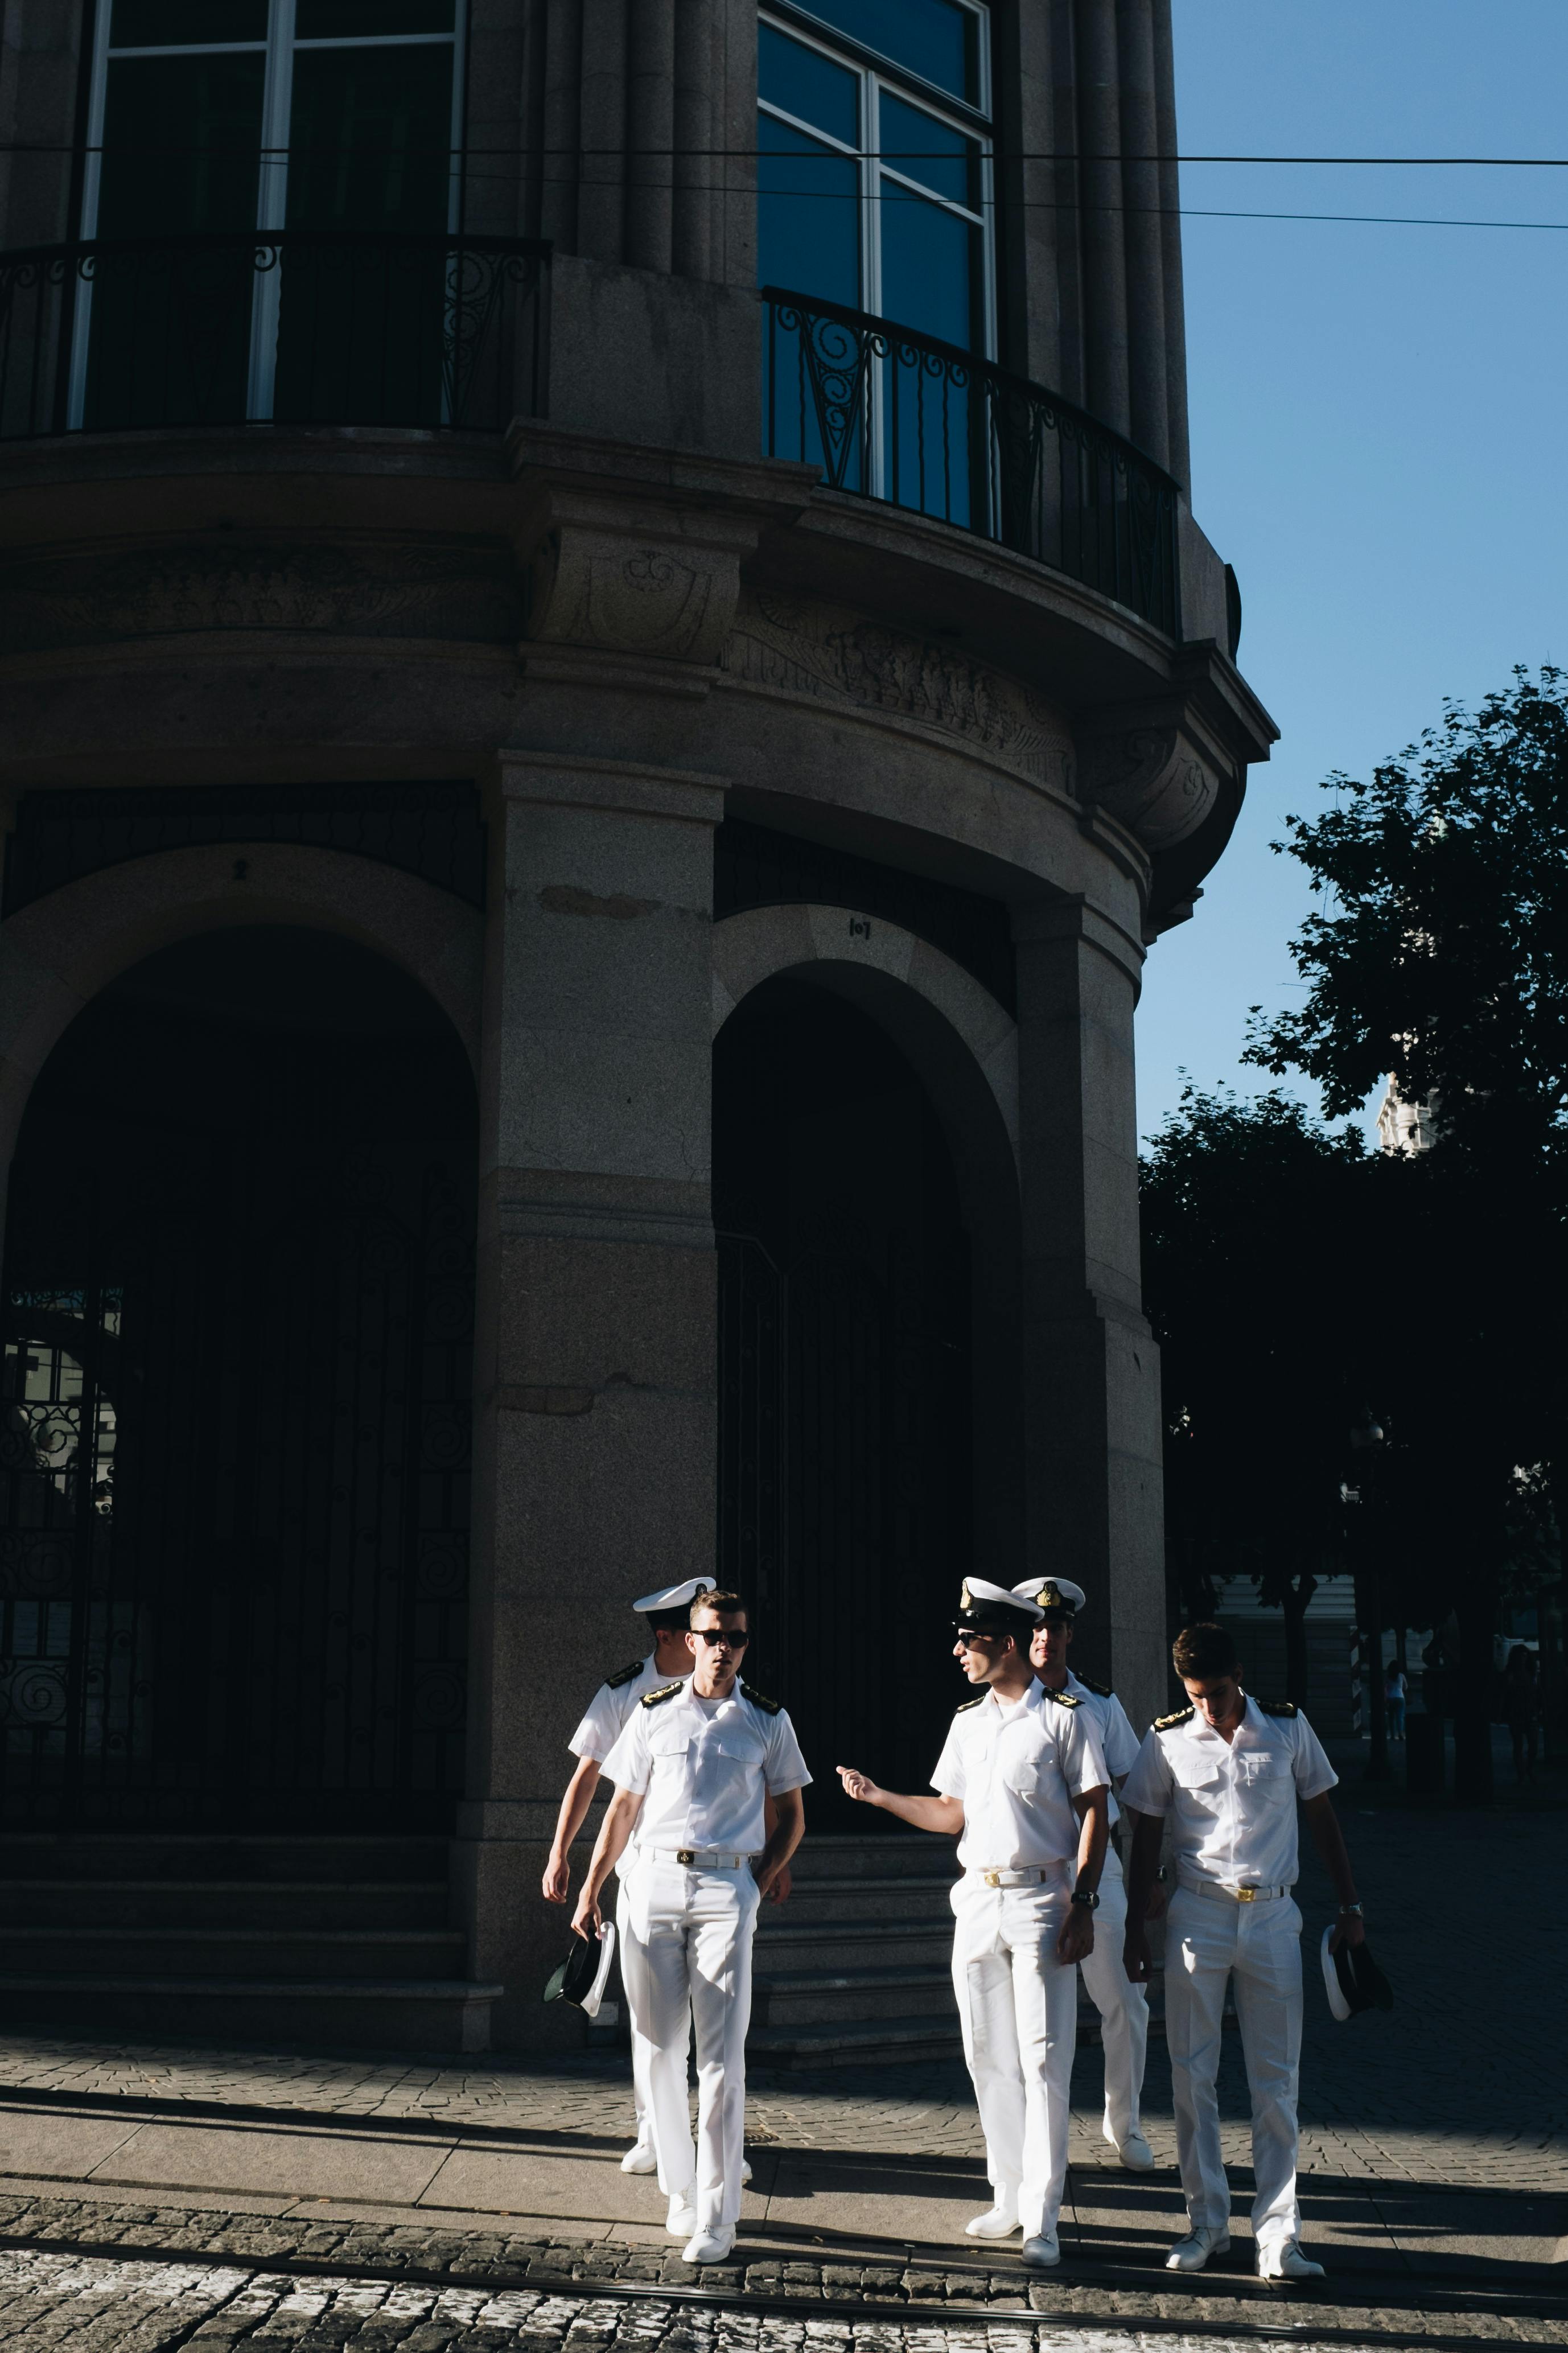 five navy officers standing near building